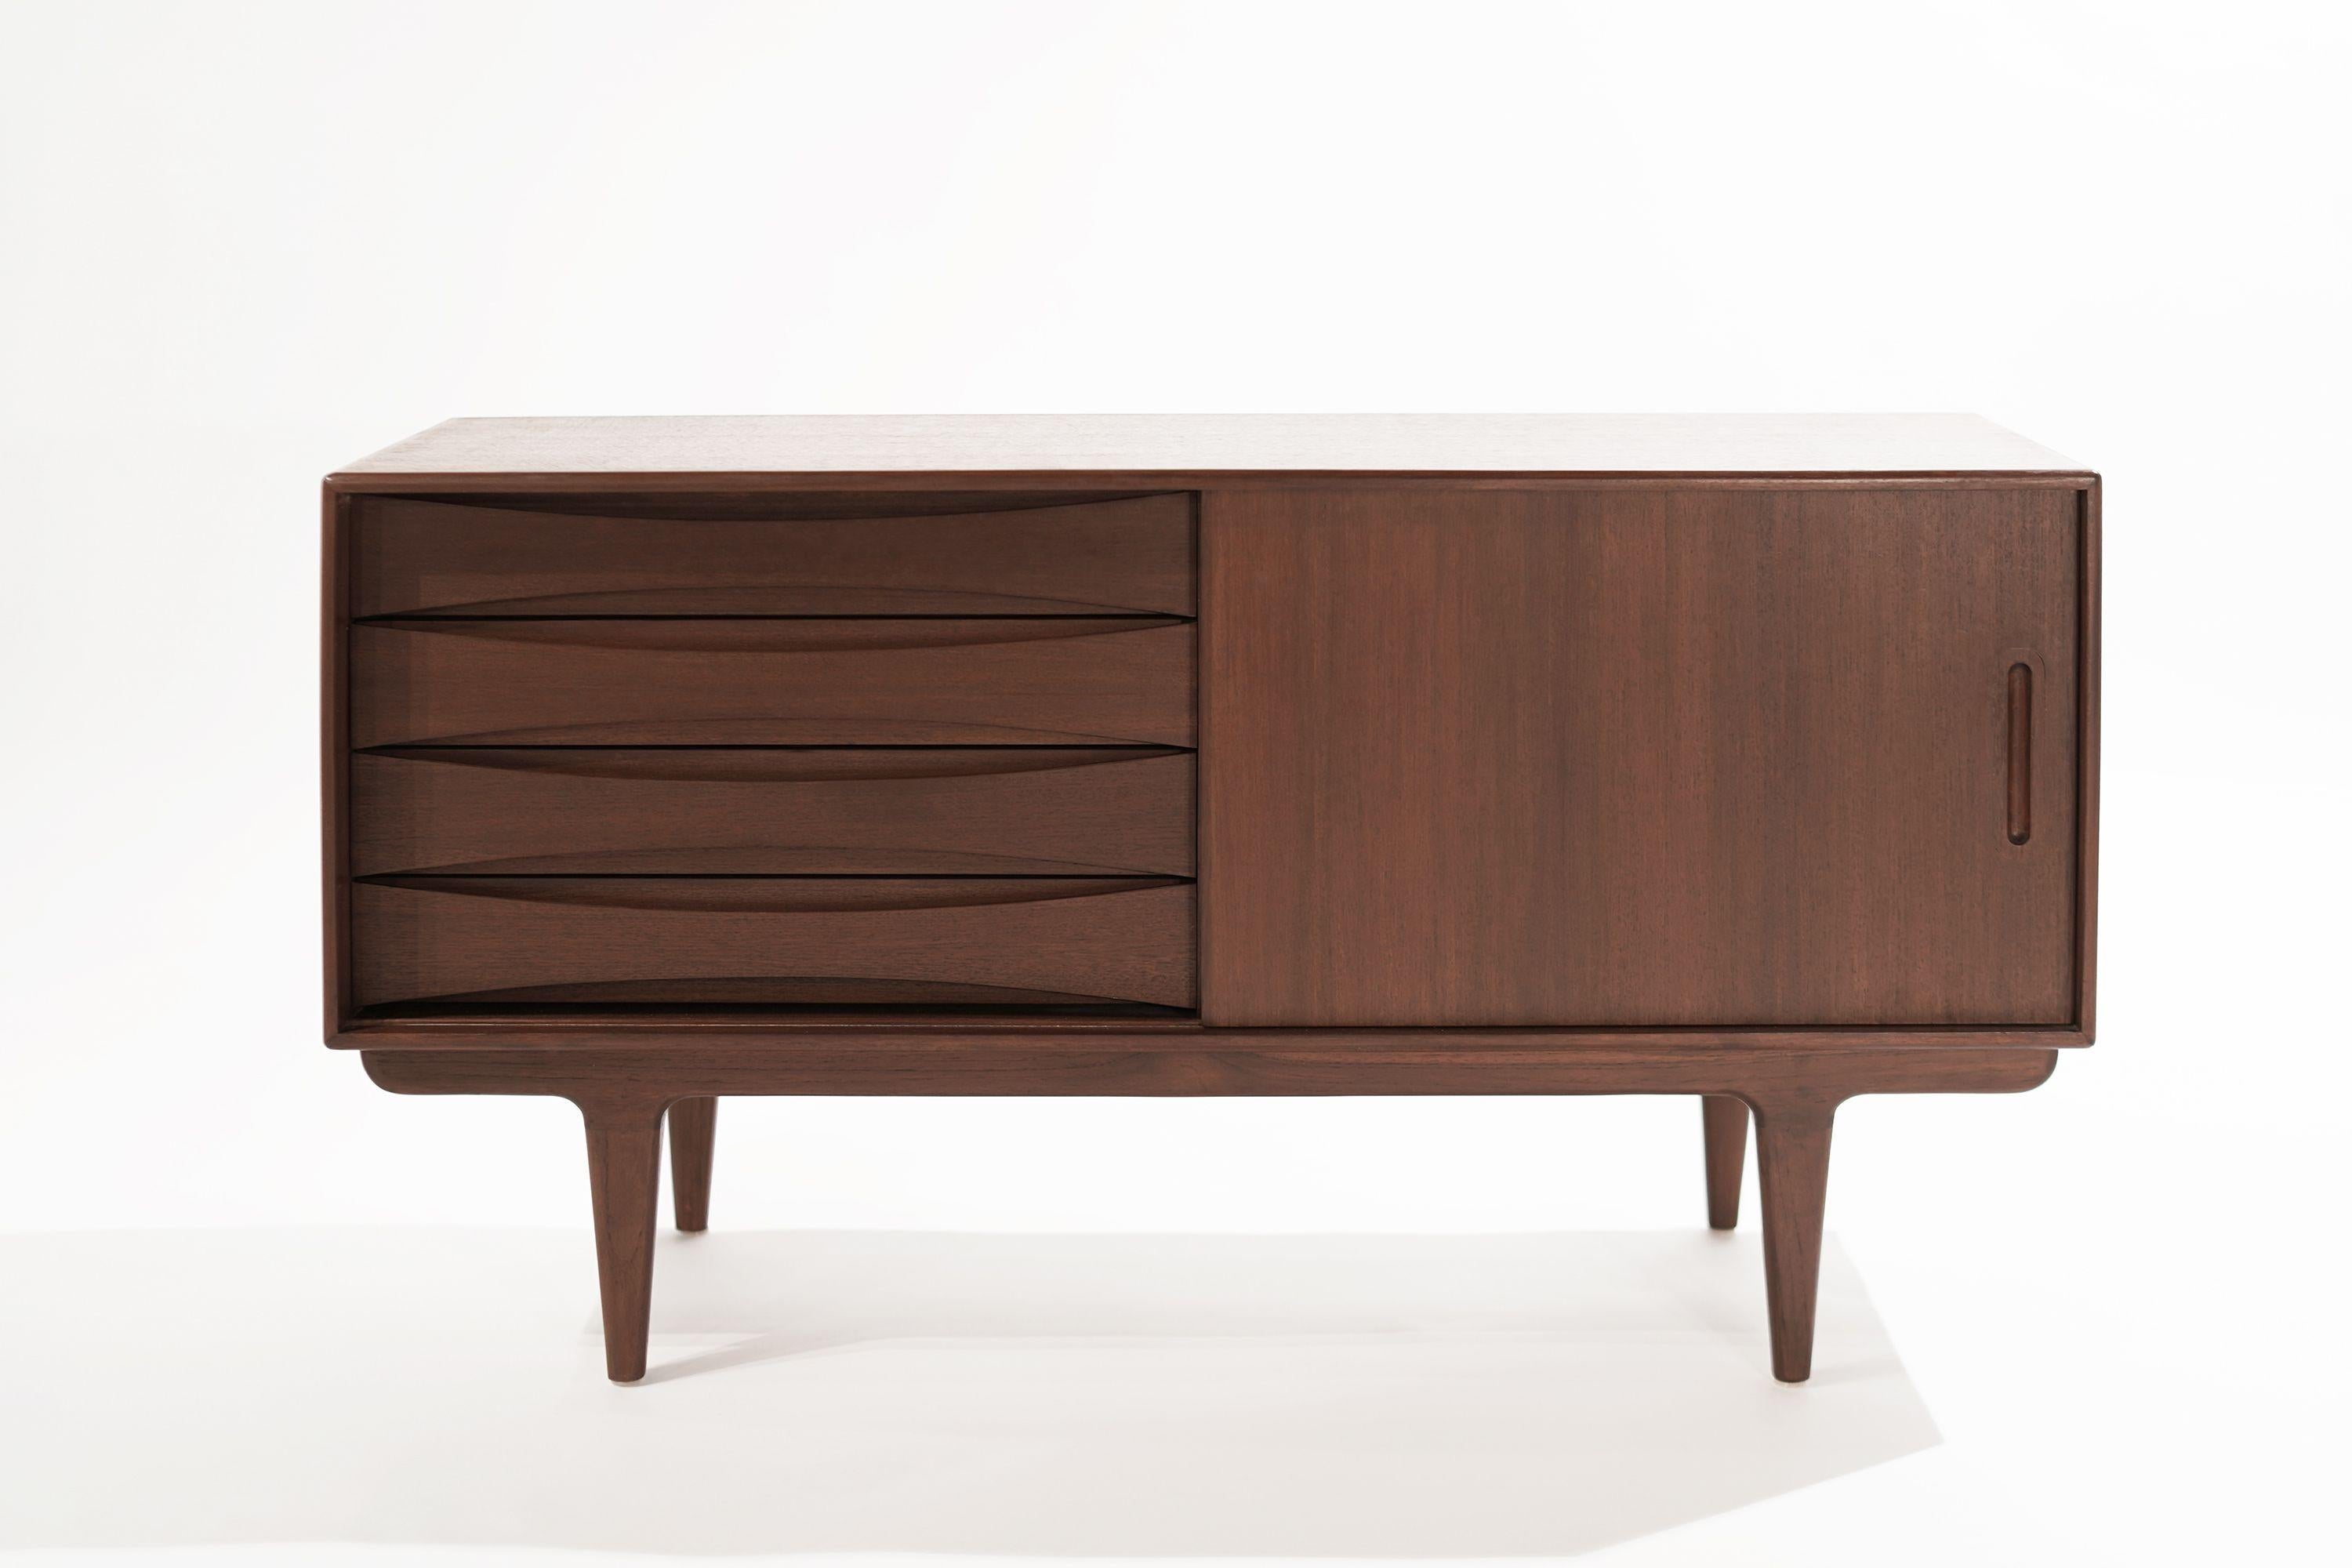 A credenza or sideboard original from Denmark, circa 1950s. Executed in teak, sliding doors open up to reveal shelving, the three drawers provide ample storage capacity.

Other designers from this period include Finn Juhl, Vladimir Kagan, Hans